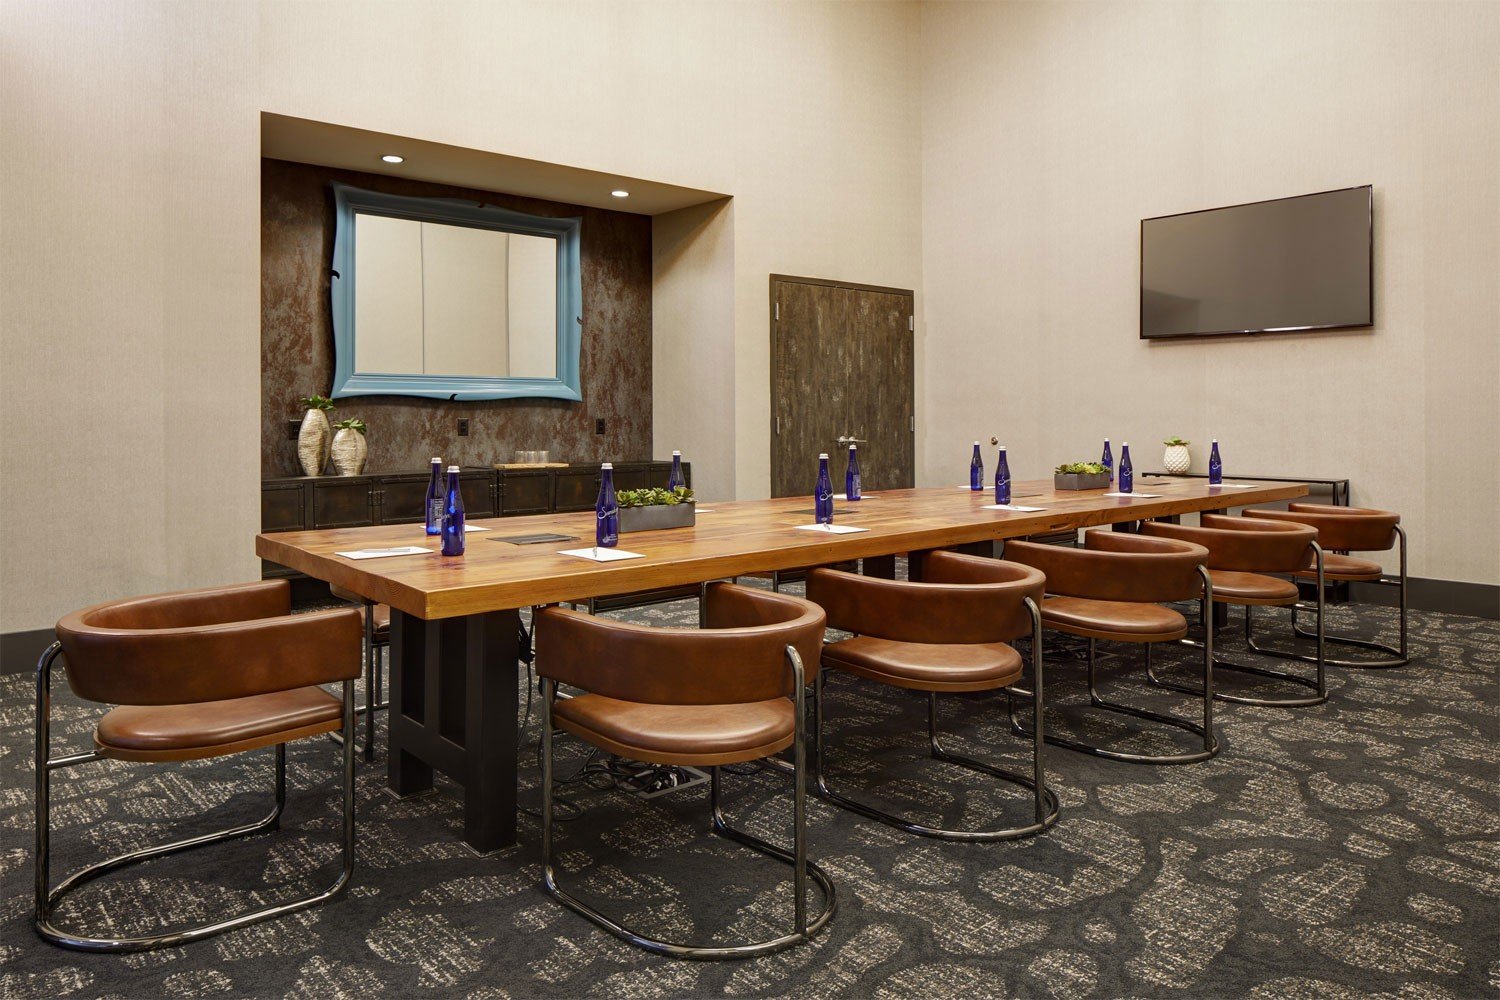 Archer Hotel Florham Park - Boardroom with bottled water and notepads